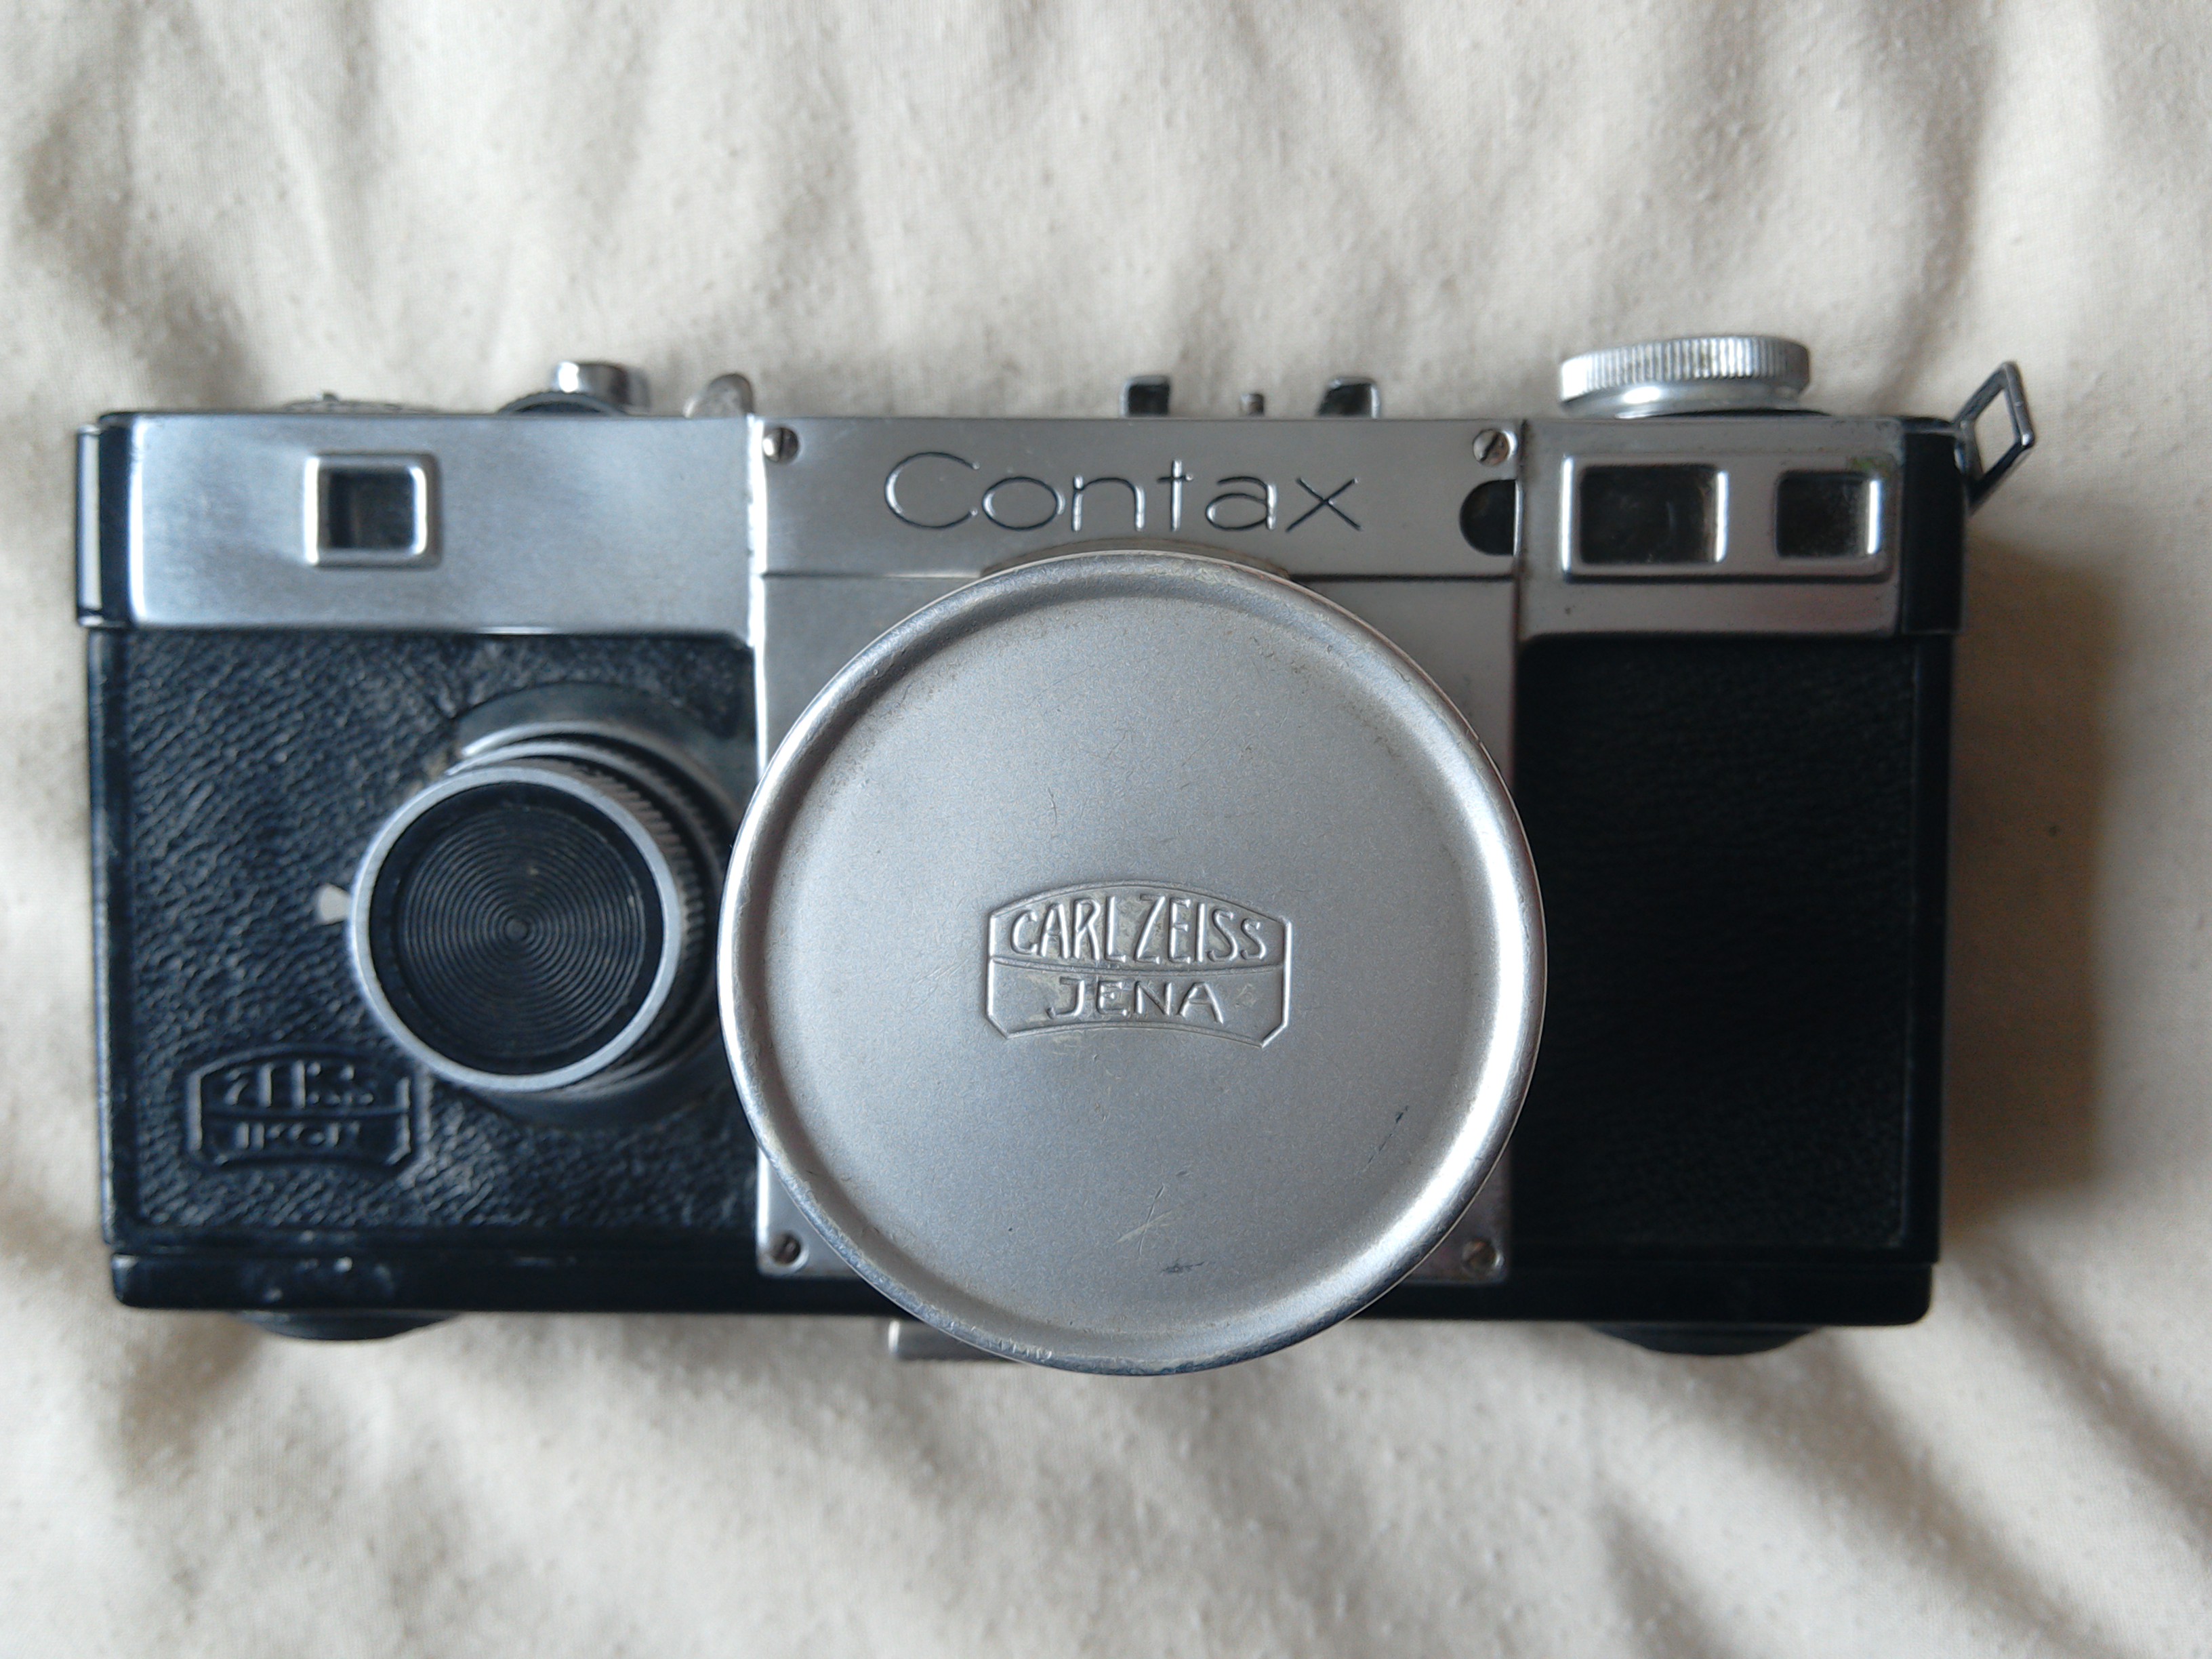 Contax Serial Number Lookup